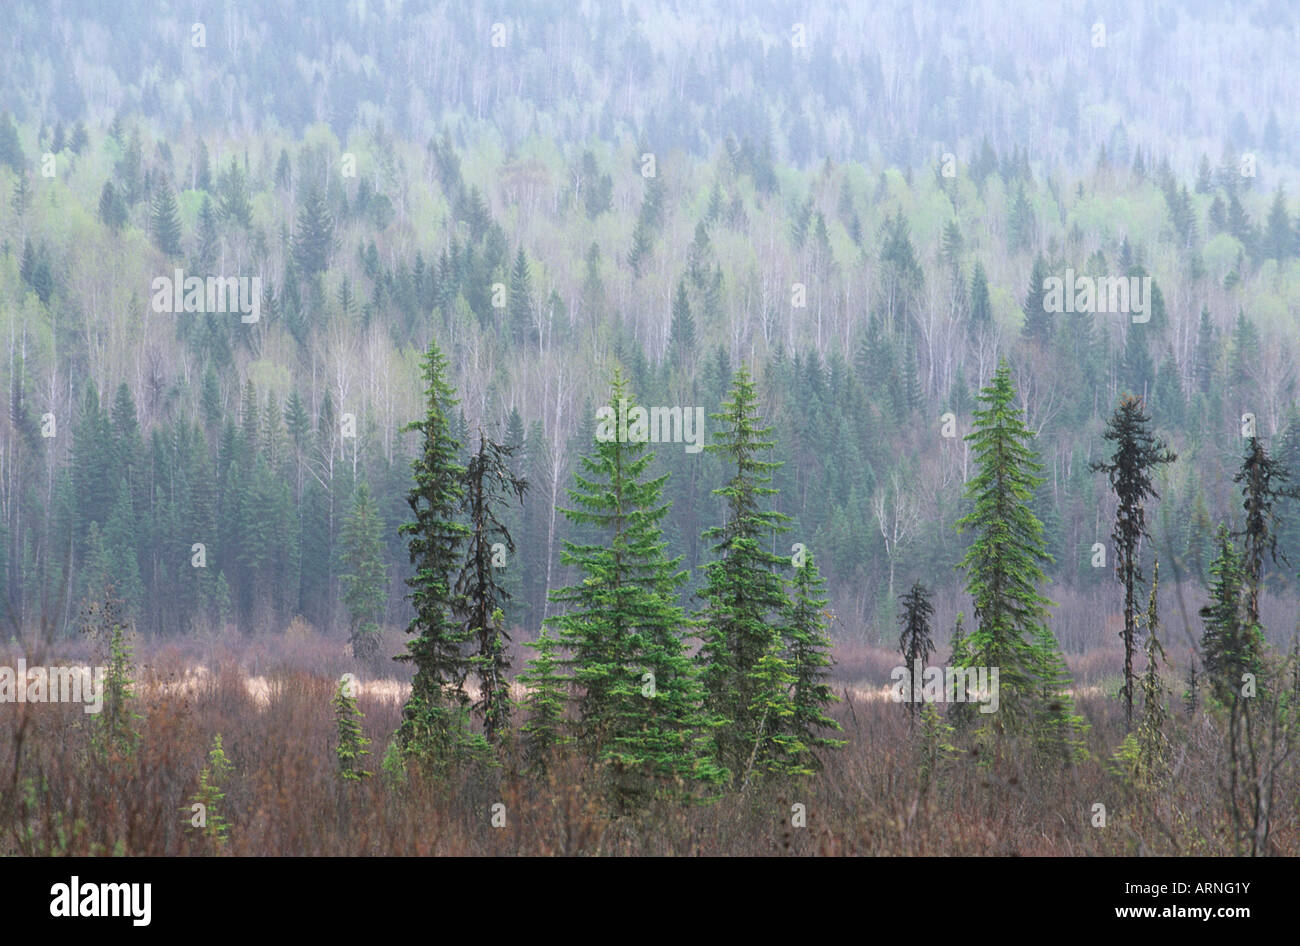 Spring leaves on poplar trees with firs in dark tones, British Columbia, Canada. Stock Photo